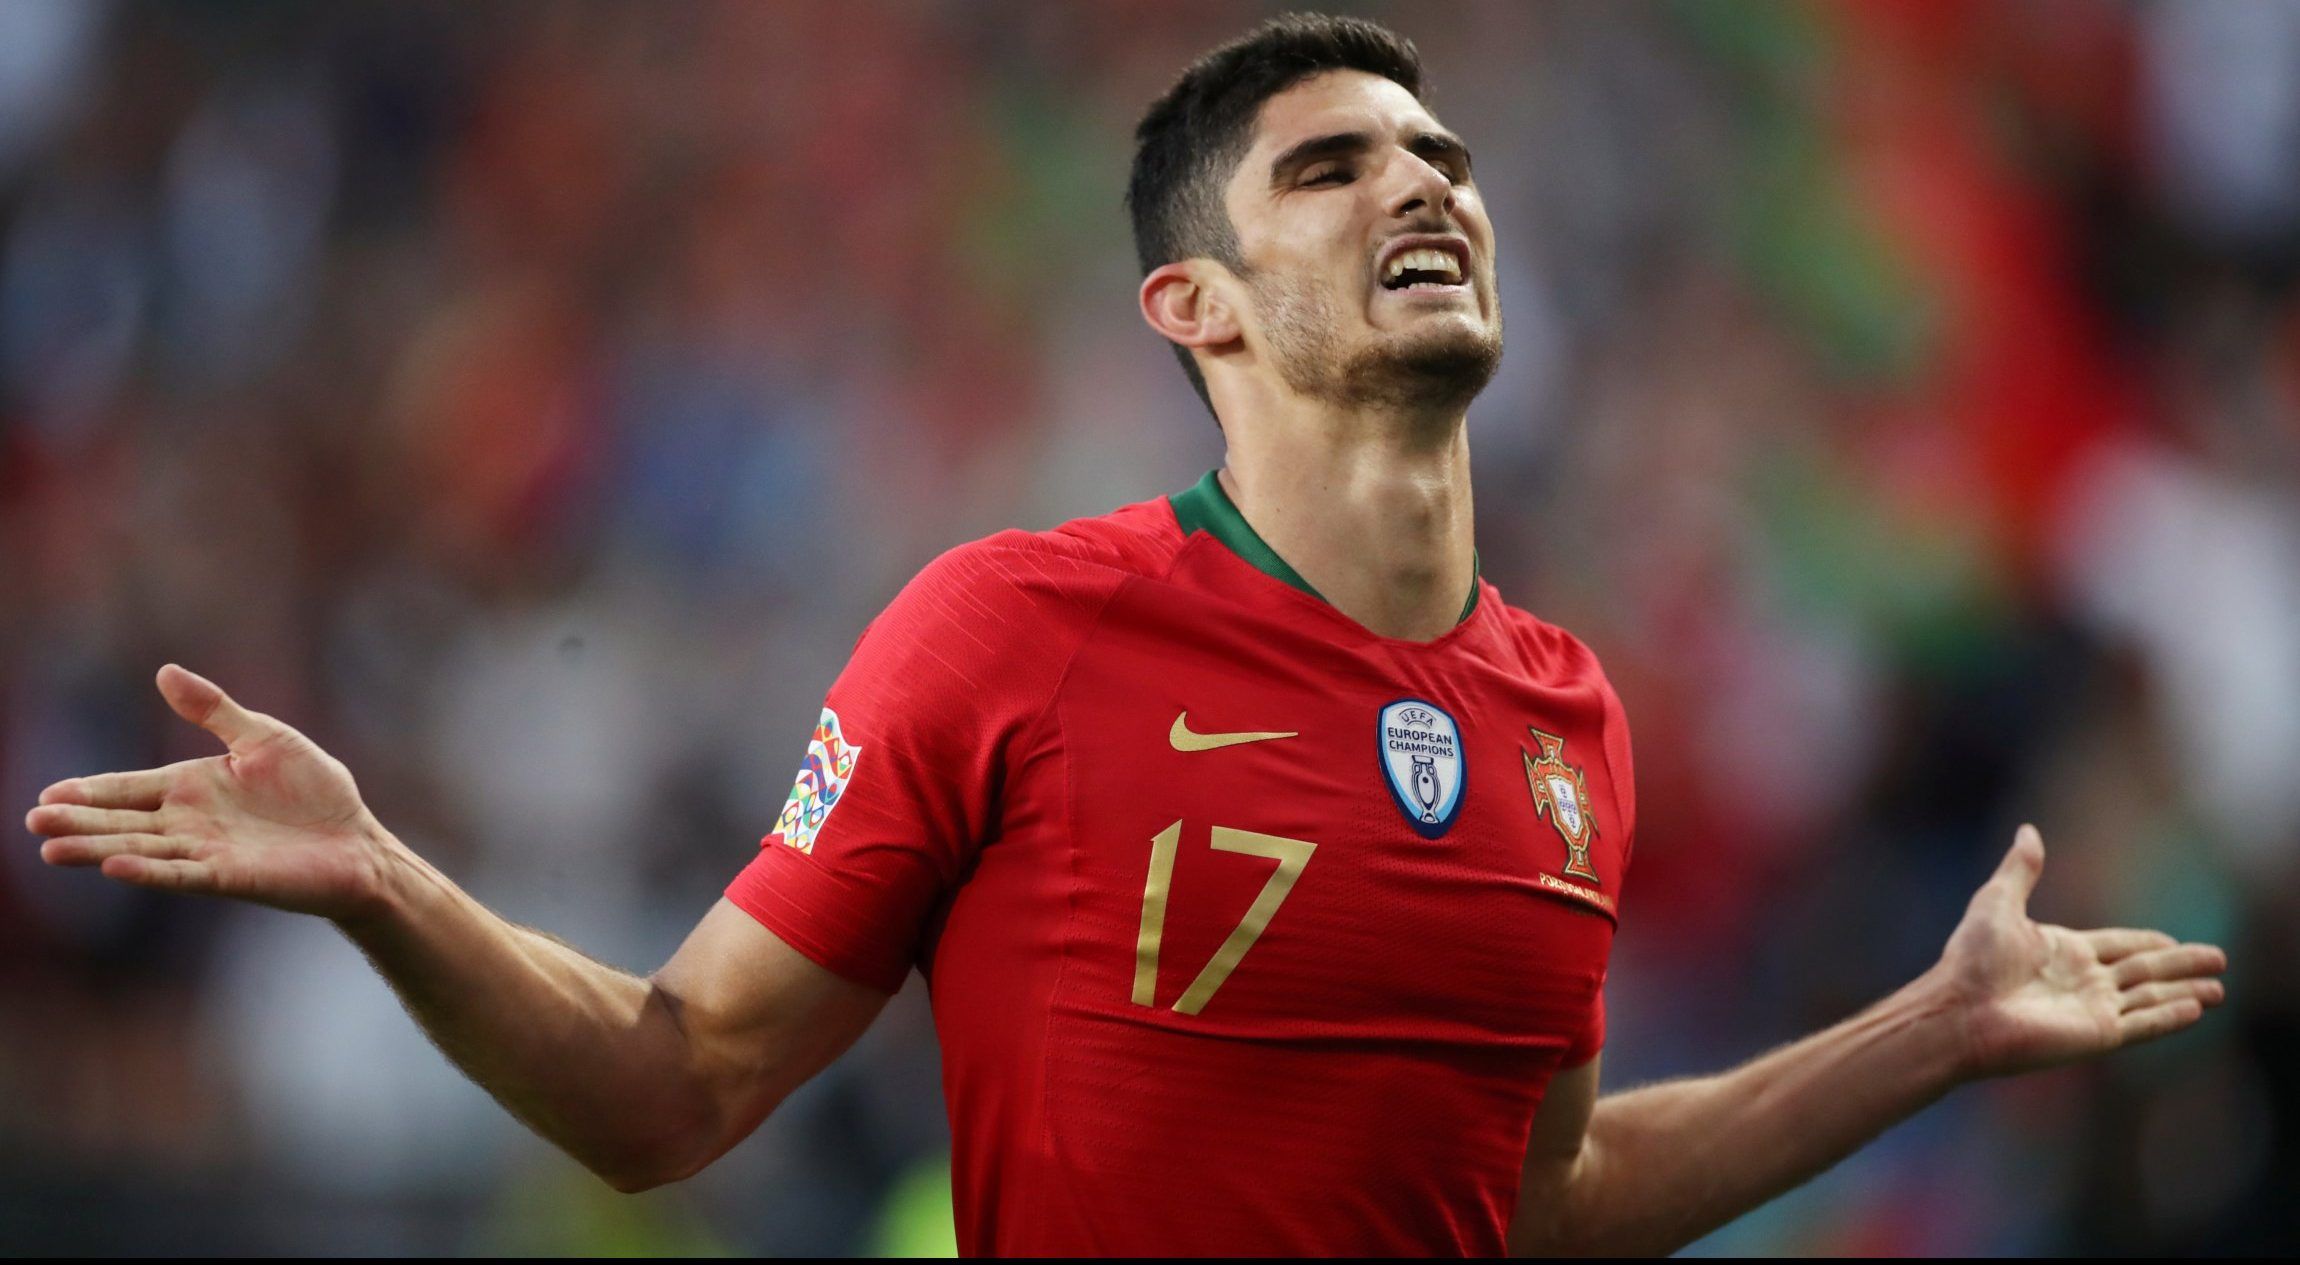 portugal and valencia winger concalo guedes celebrates scoring against netherlands uefa nations league